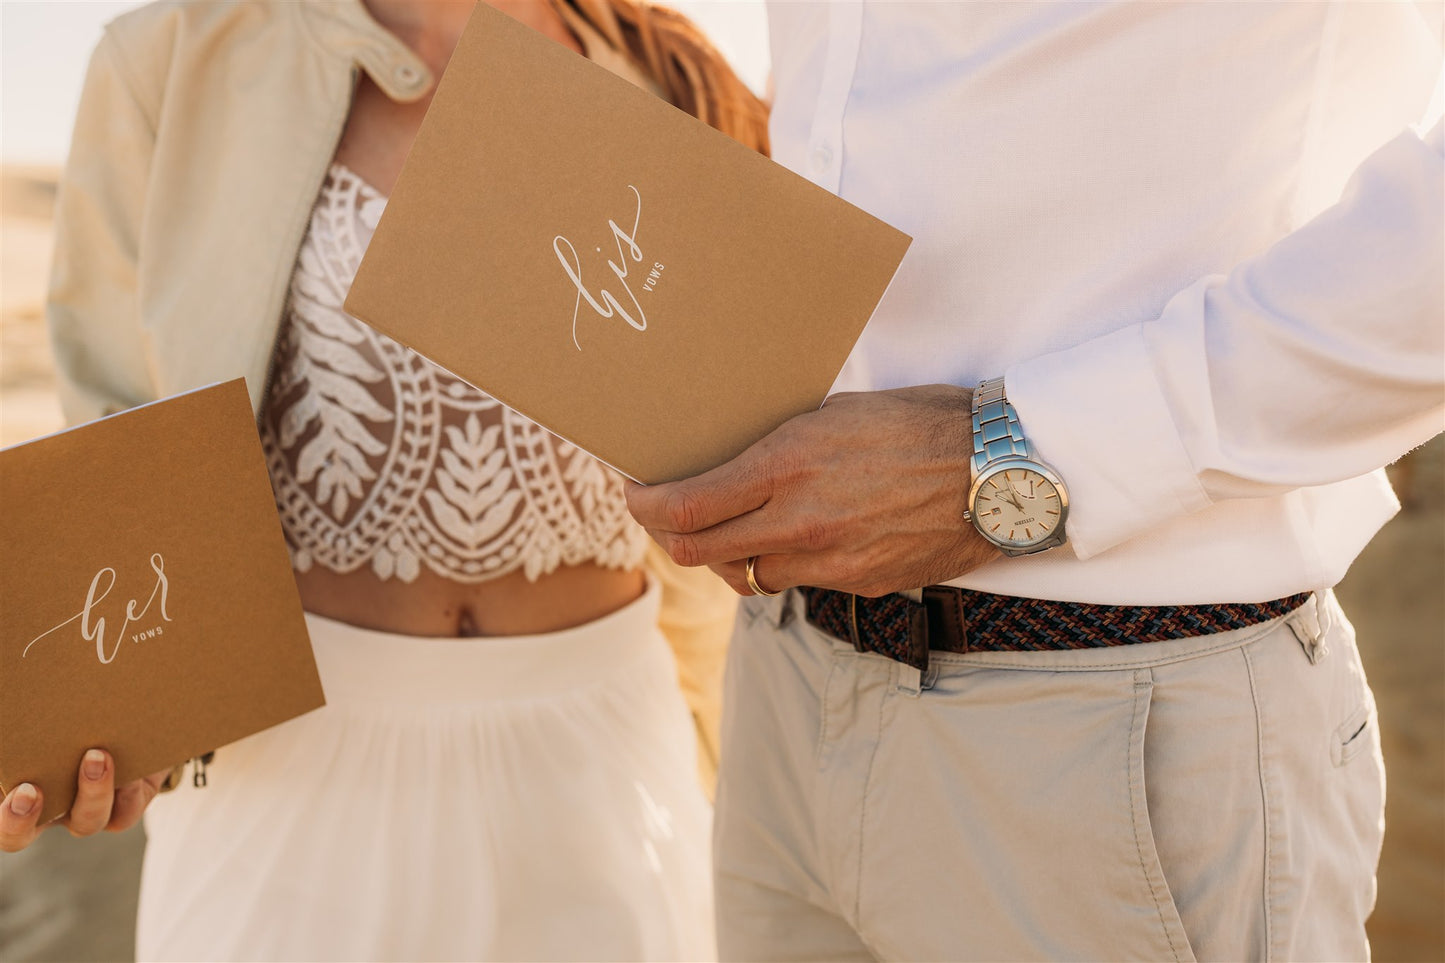 Couple holding wedding vow books | The Paper Gazelle